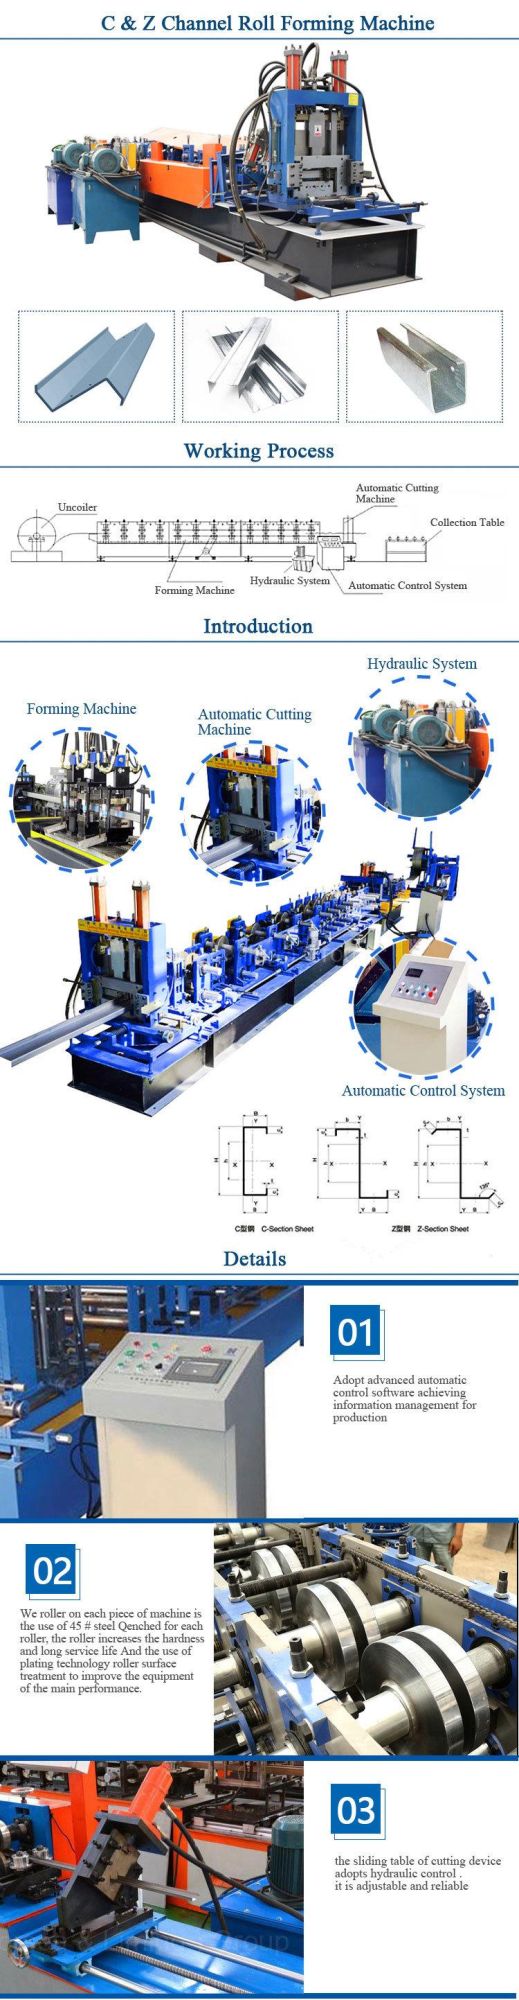 Automatic Metal Iron Steel High Speed Clamp Rings Rolling Machine